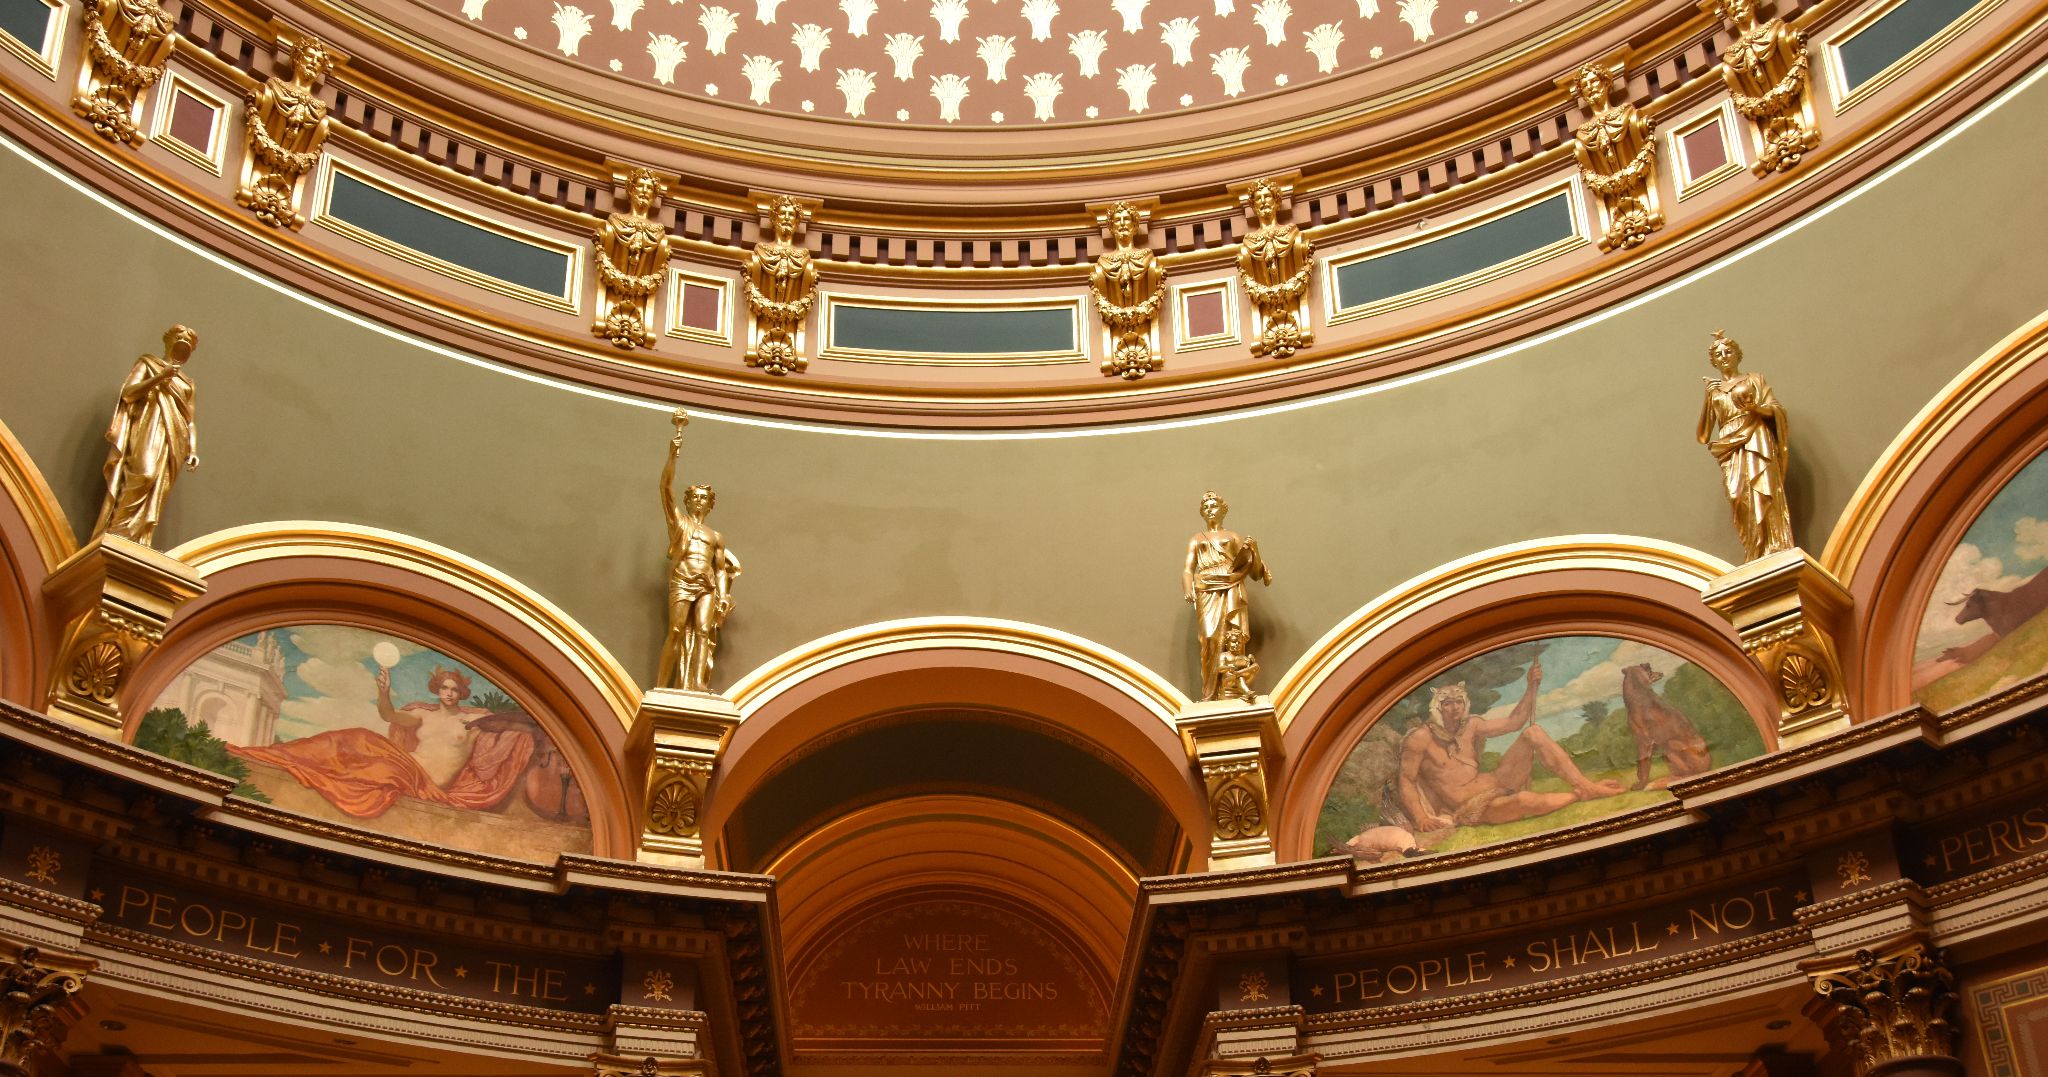 Iowa State Capitol (Second Floor States and Paintings - a), Des Moines, IA - 2016-06-30